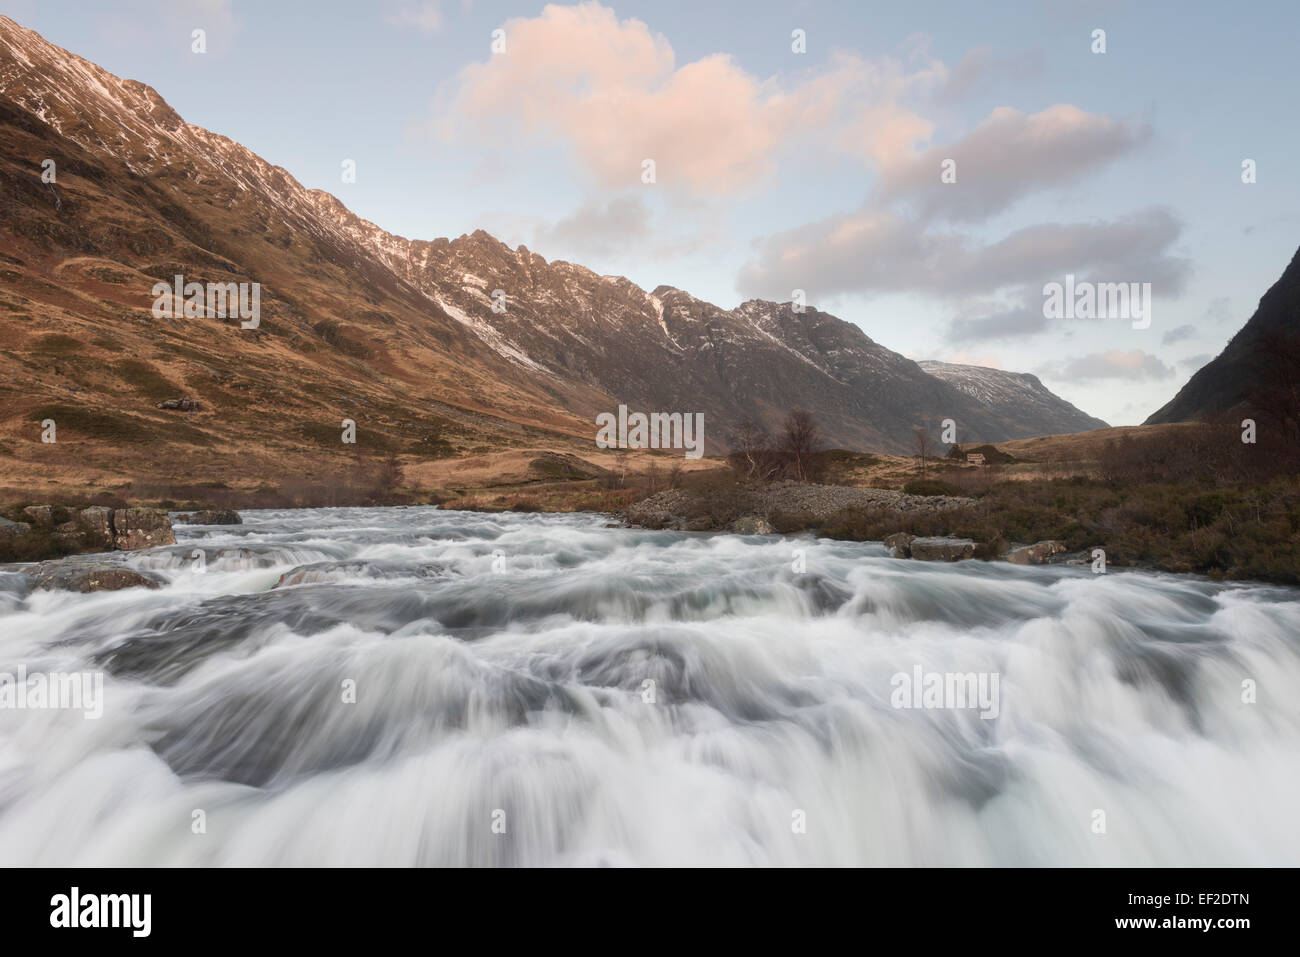 Surging rapids on the River Coe, with the Aonach Eagach ridge in the background, Glencoe, Scotland Stock Photo